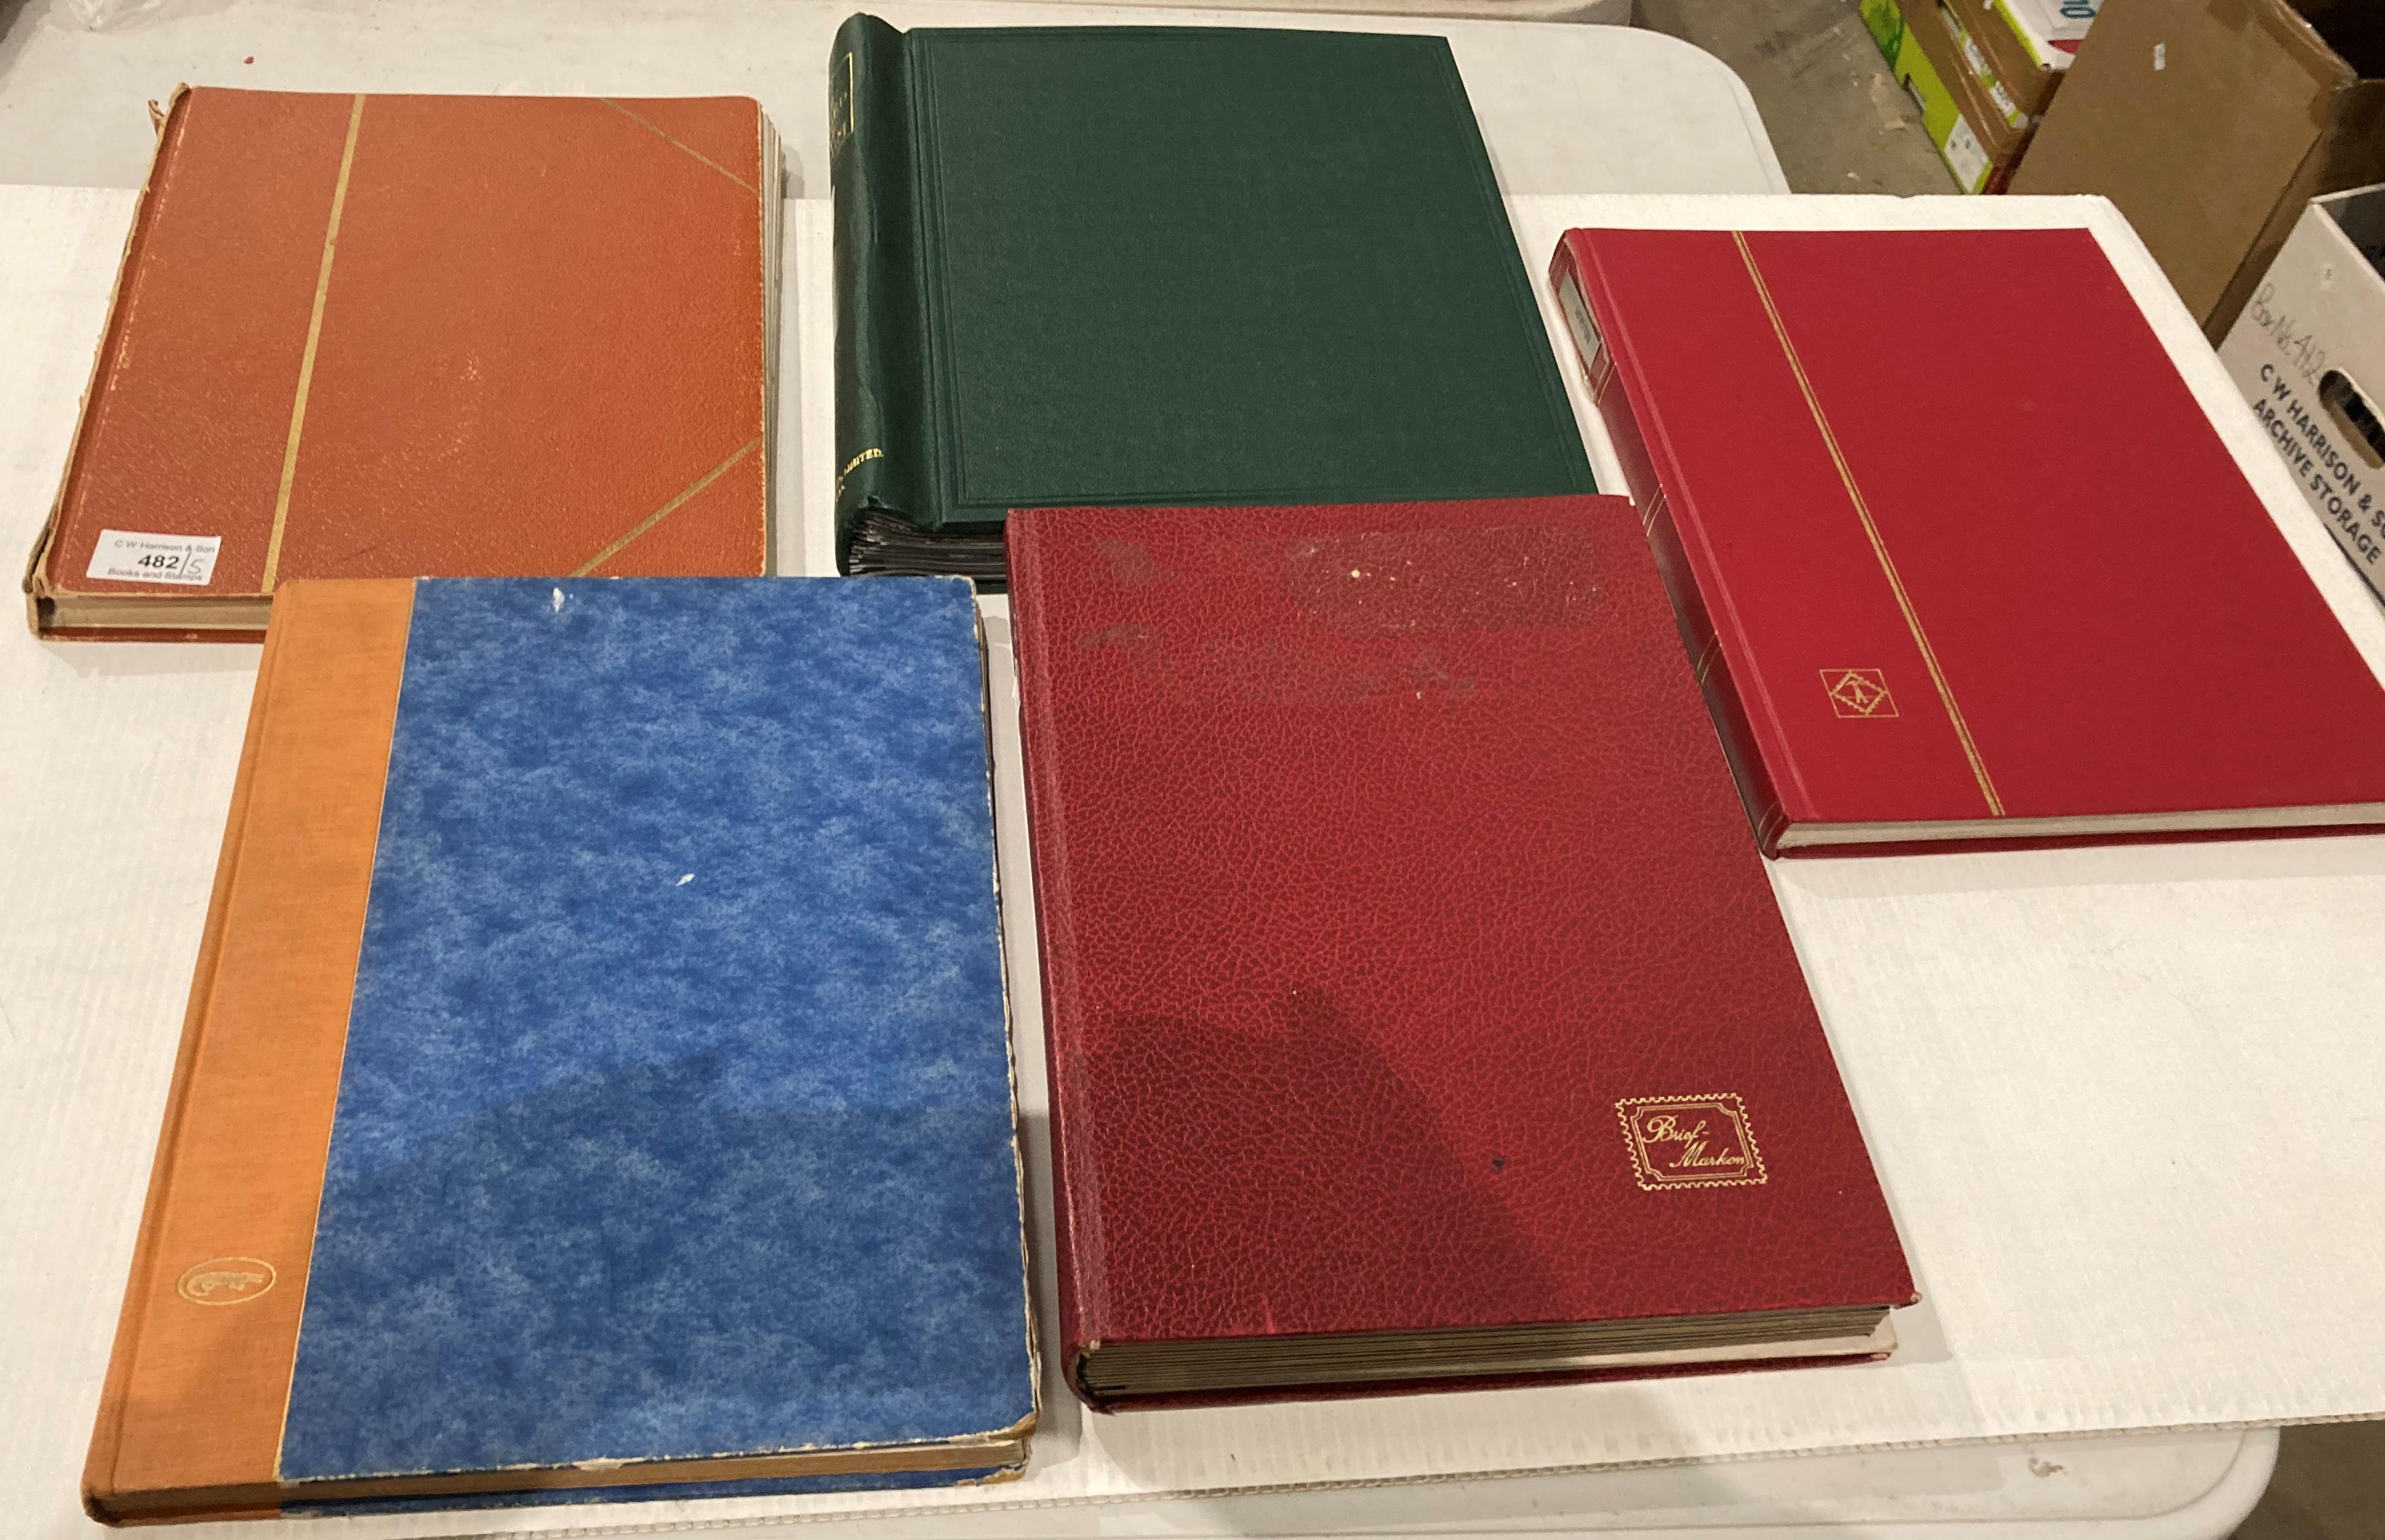 Five stamp albums and contents - Belgian stamps - three fairly full,